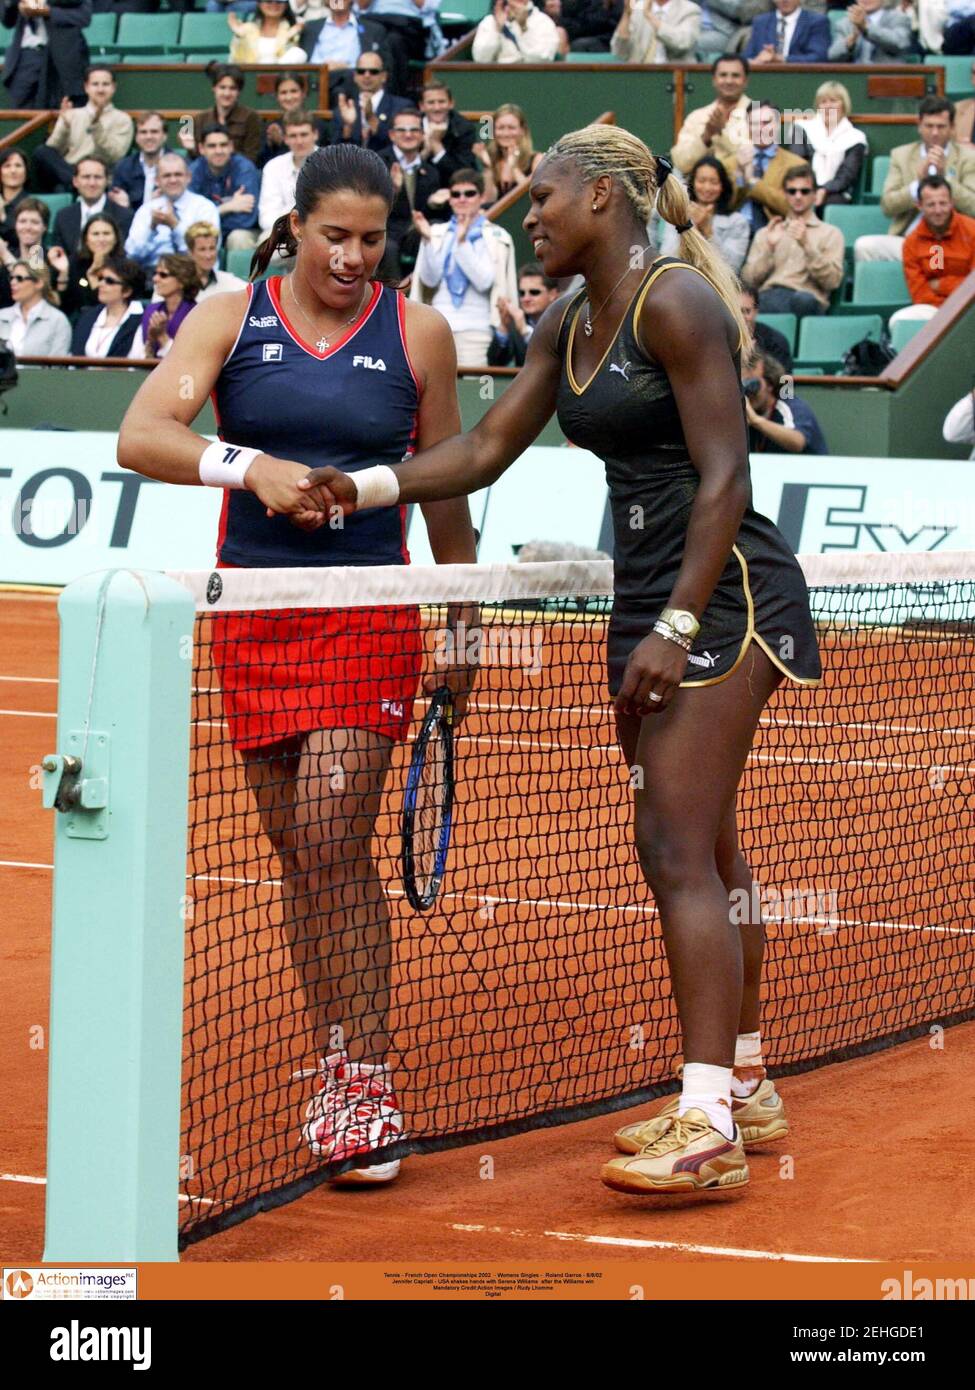 Tennis - French Open Championships 2002 - Women's Singles - Roland Garros -  6/6/02 Jennifer Capriati - USA shakes hands with Serena Williams after the  Williams win Mandatory Credit:Action Images / Rudy Lhomme Digital Stock  Photo - Alamy